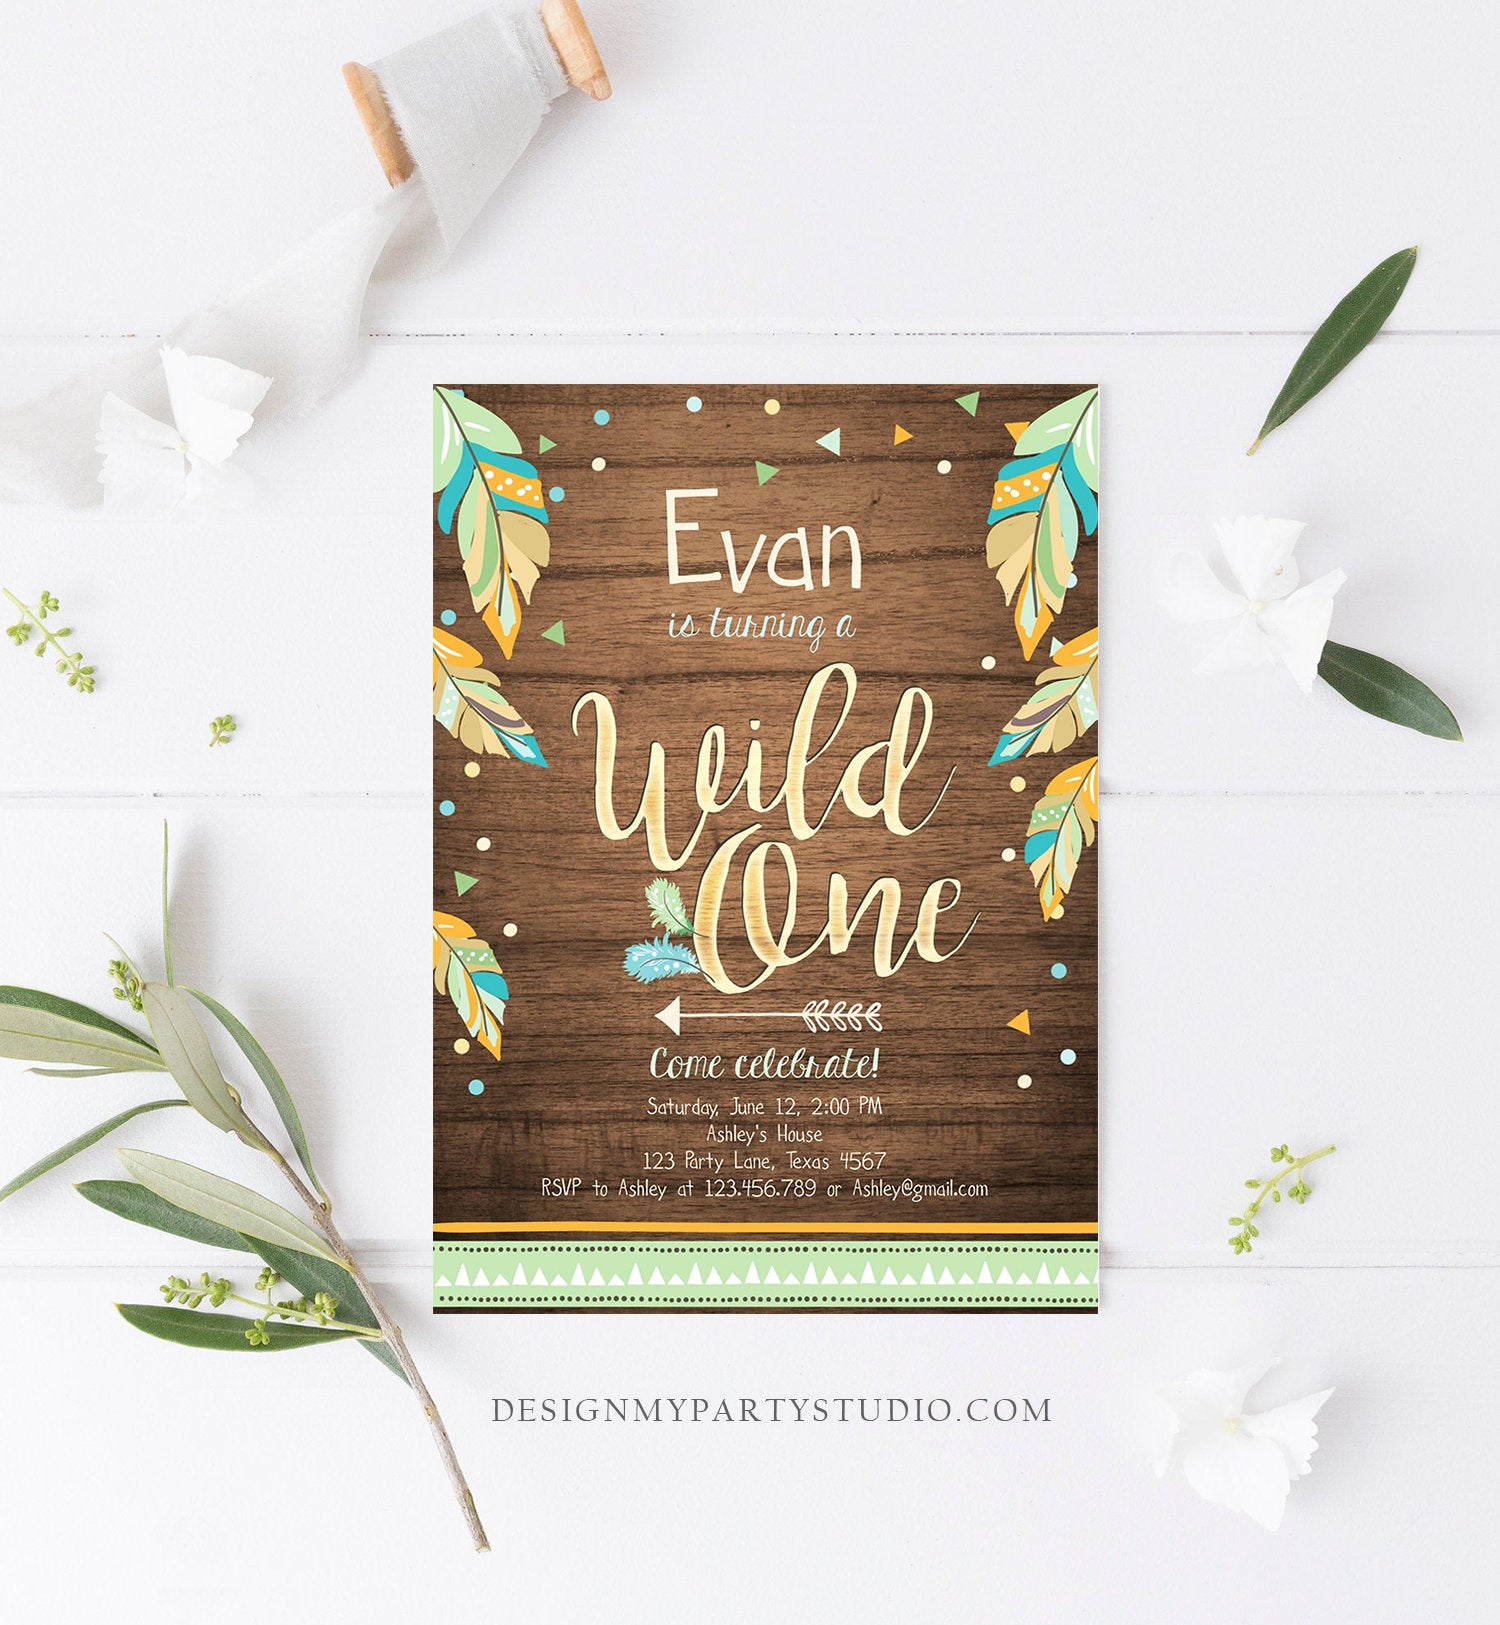 Editable Wild One Invitation Tribal Feathers Boy Green Teal Coral Mint Wood Gold First Birthday 1st Boho Photo Corjl Template Printable 0038